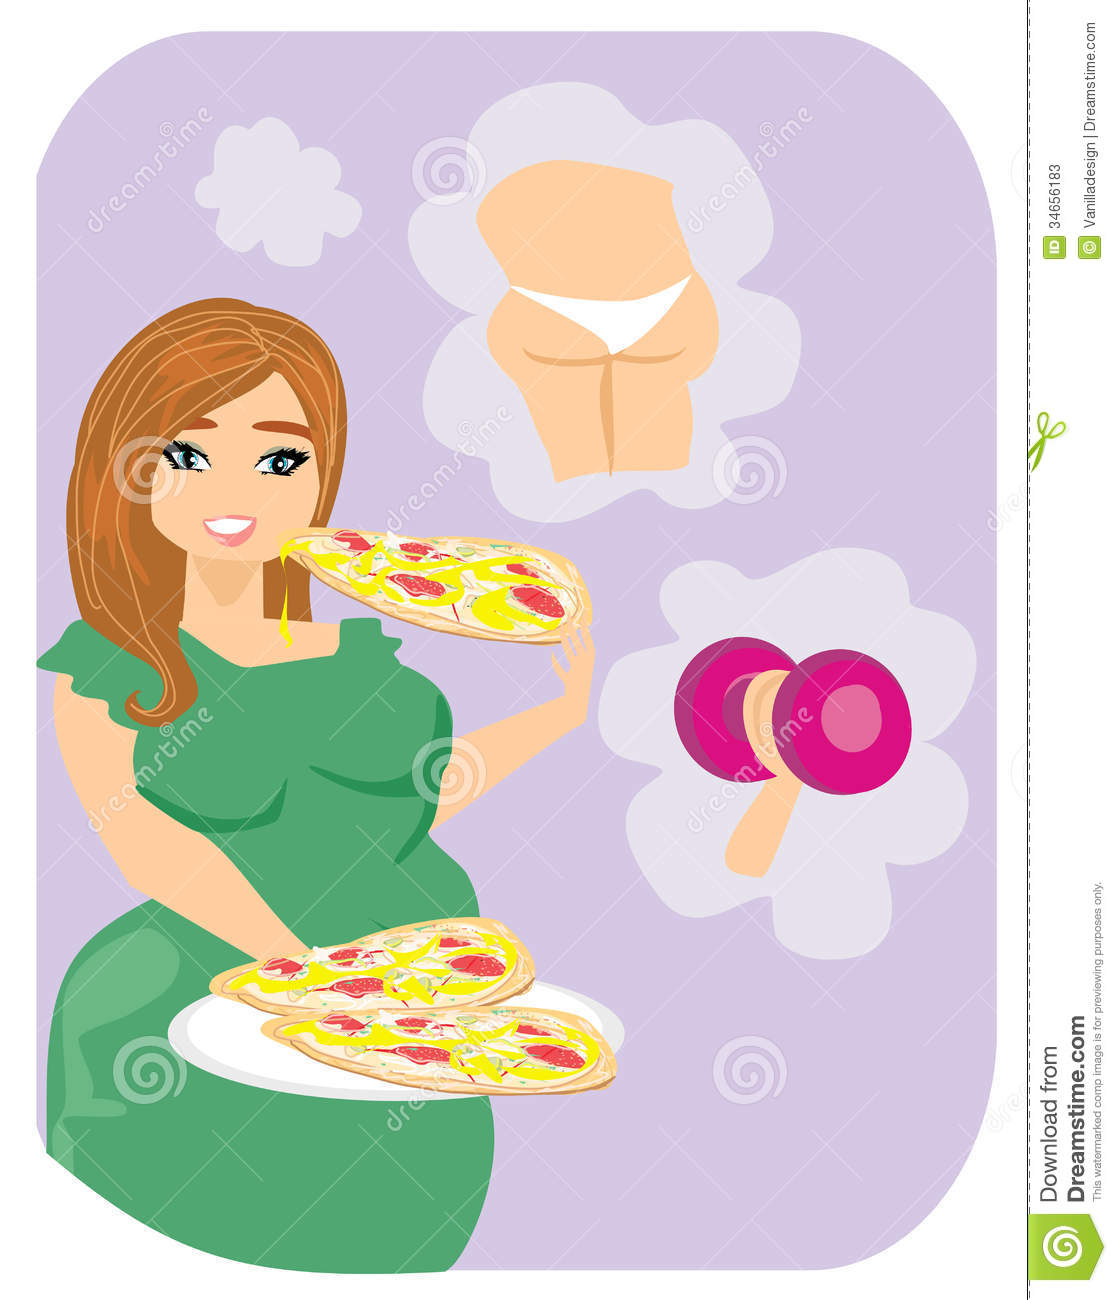 Fat Girl Eating Fattening Pizza Stock Photos   Image  34656183